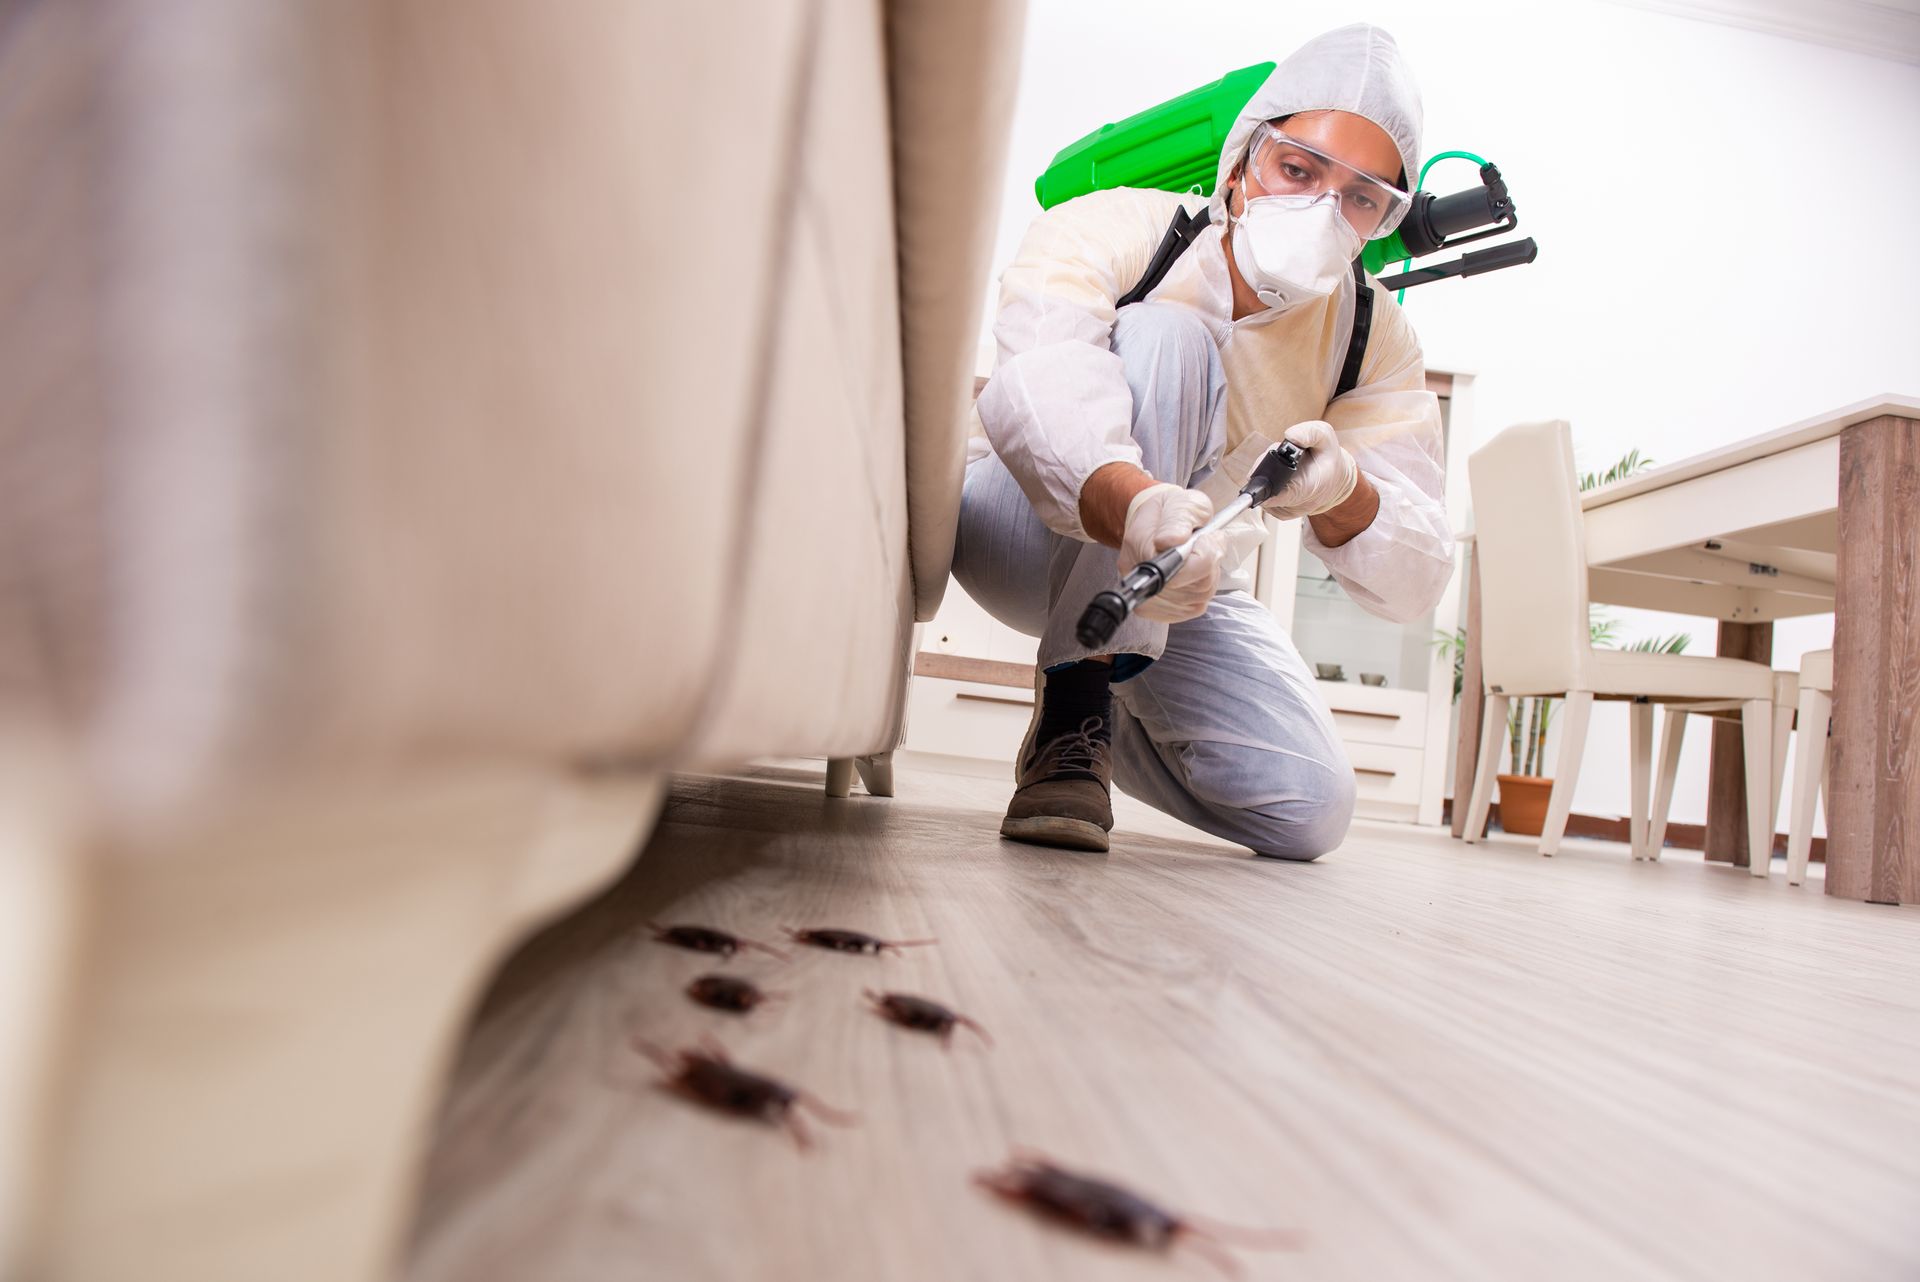 A man is spraying cockroaches in a living room.